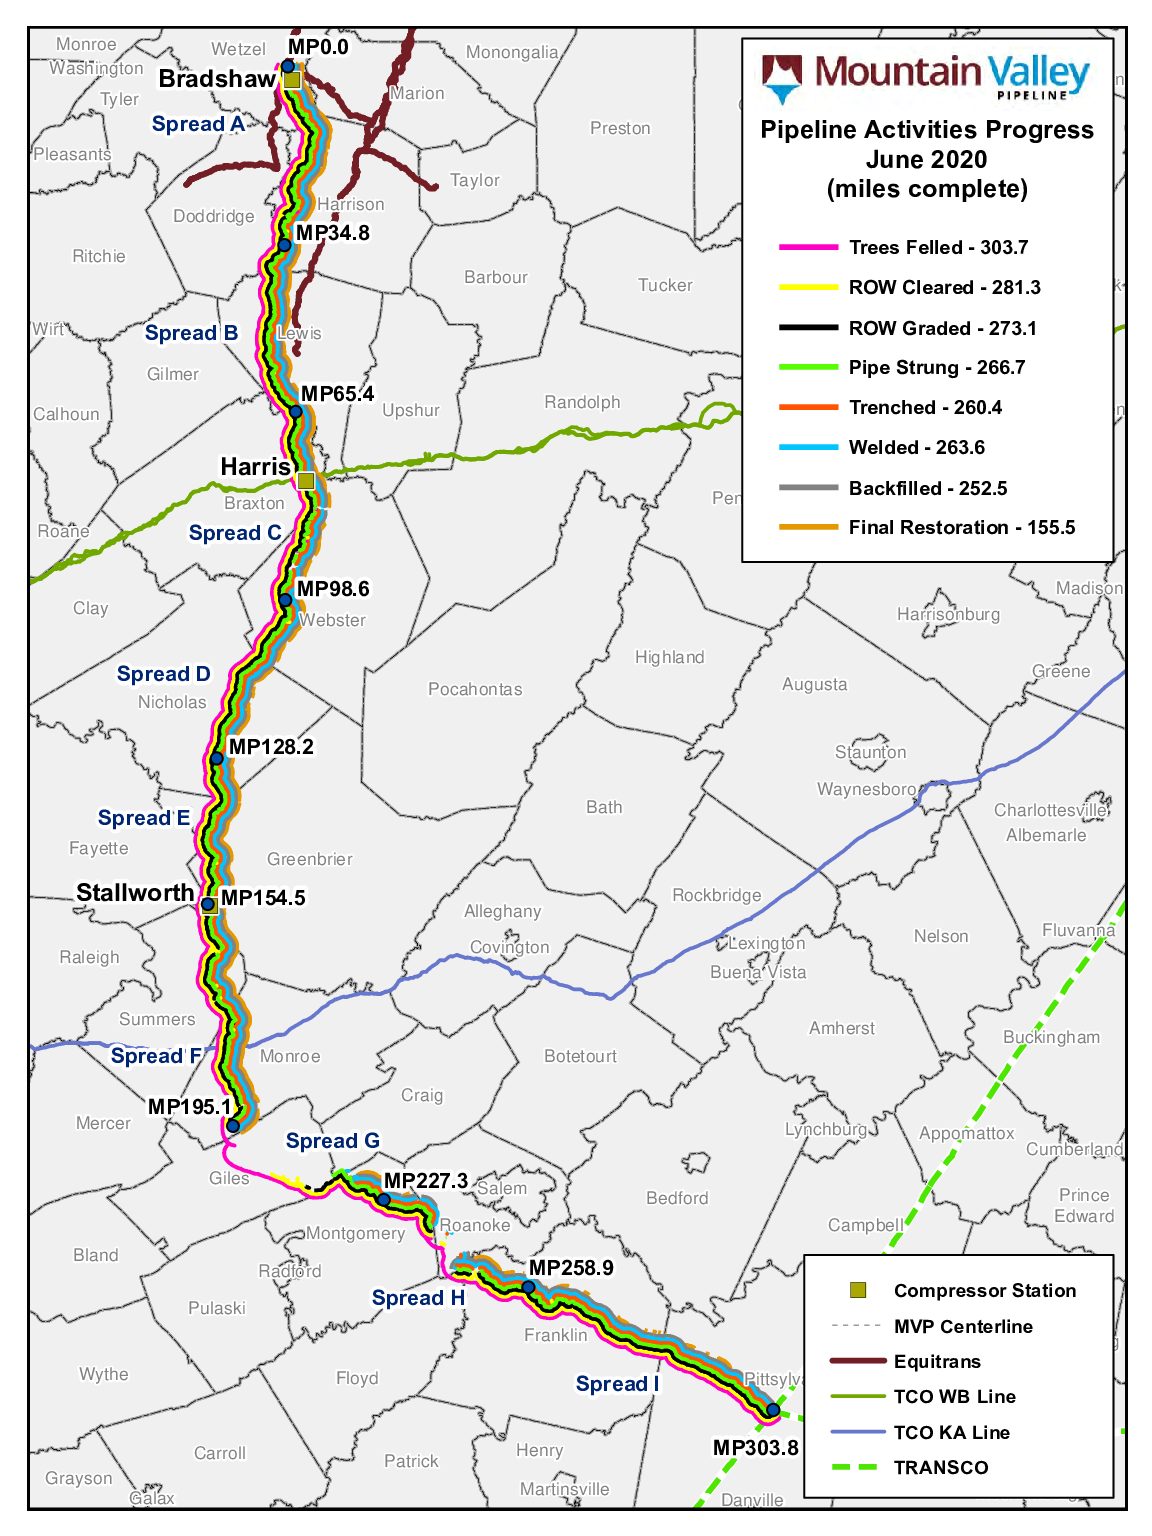 Mountain Valley Pipeline Overall Progress Map